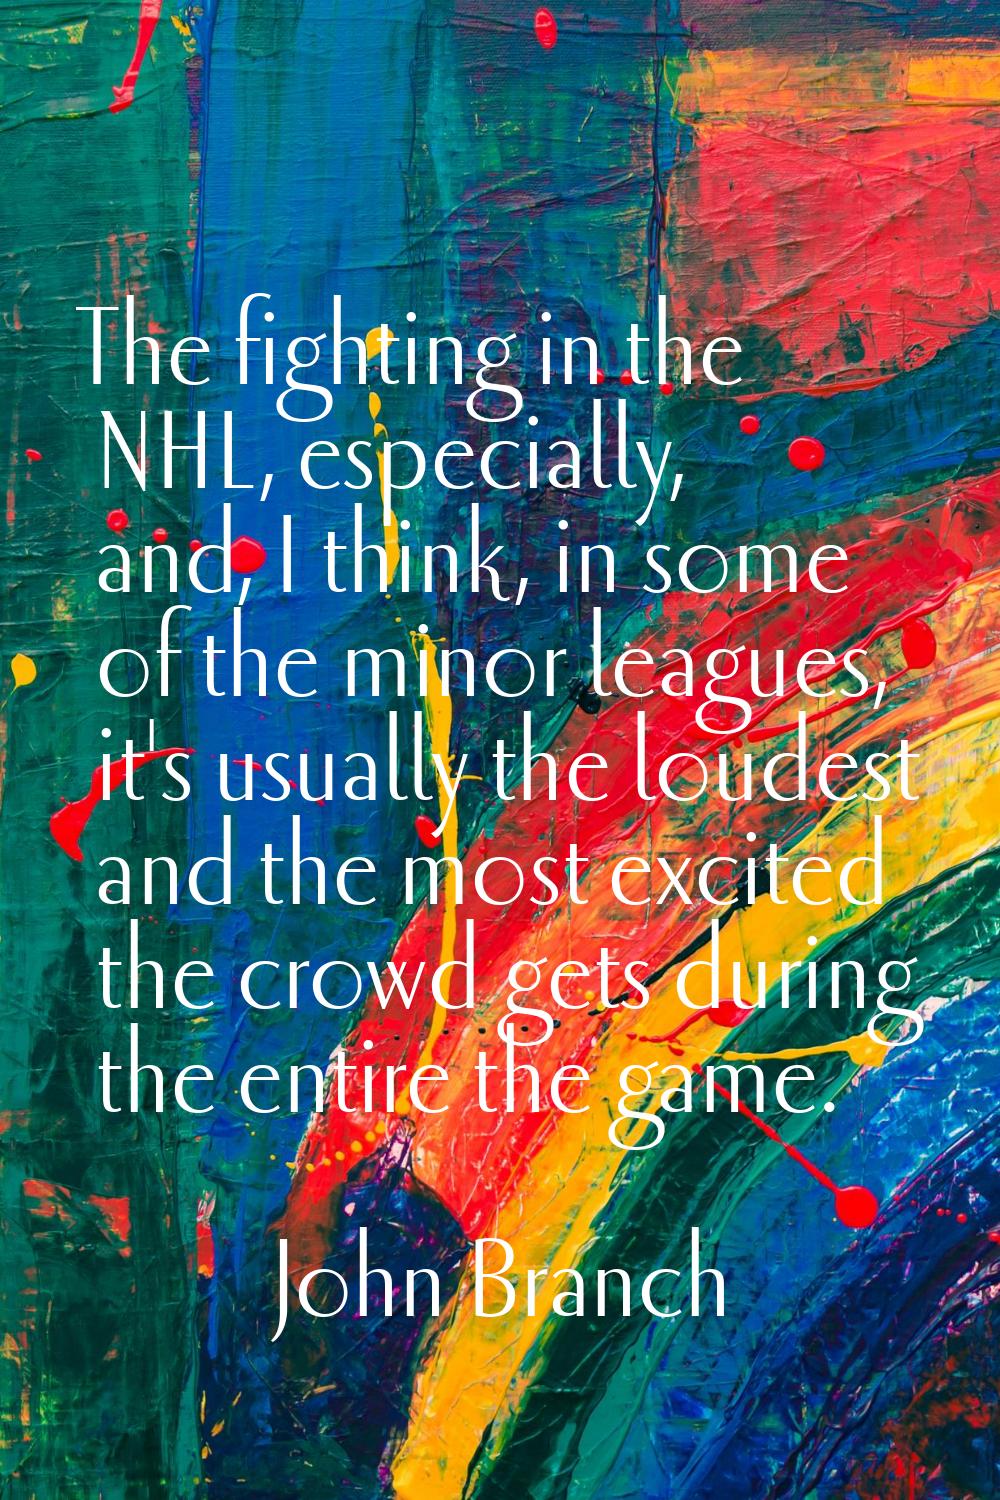 The fighting in the NHL, especially, and, I think, in some of the minor leagues, it's usually the l